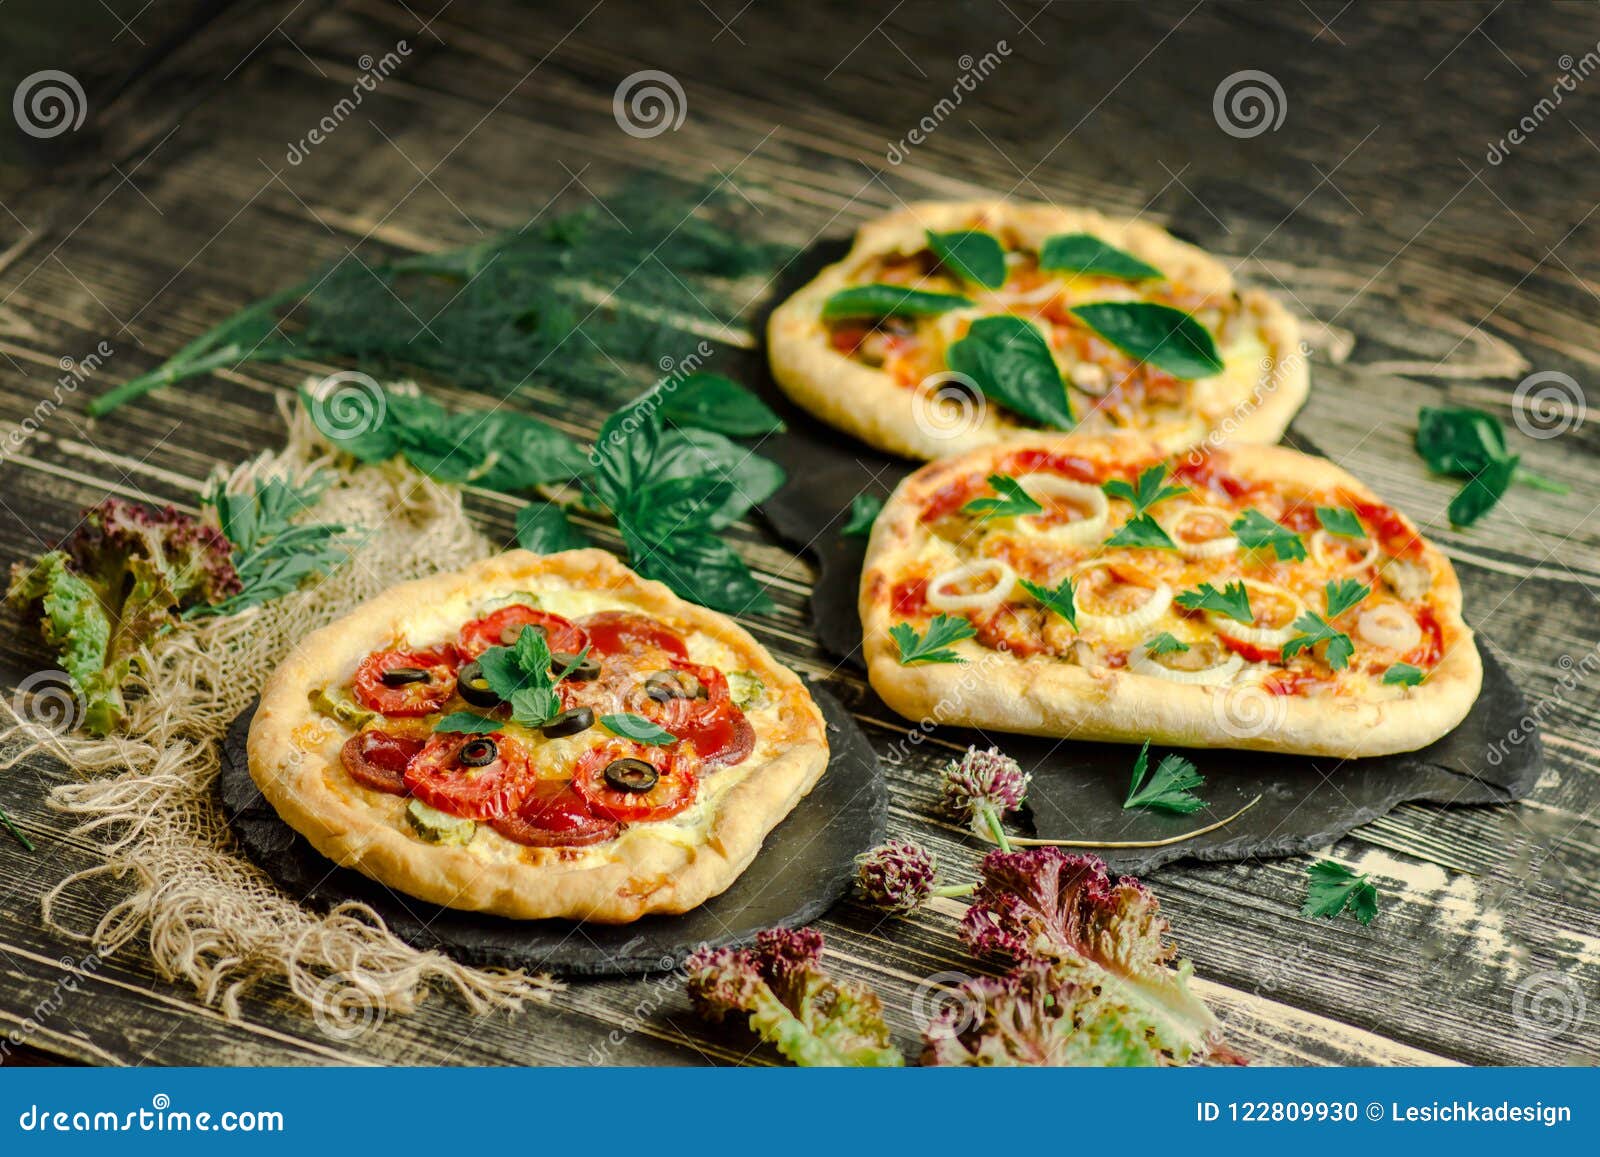 wariety pizza on wooden board and various ingredients